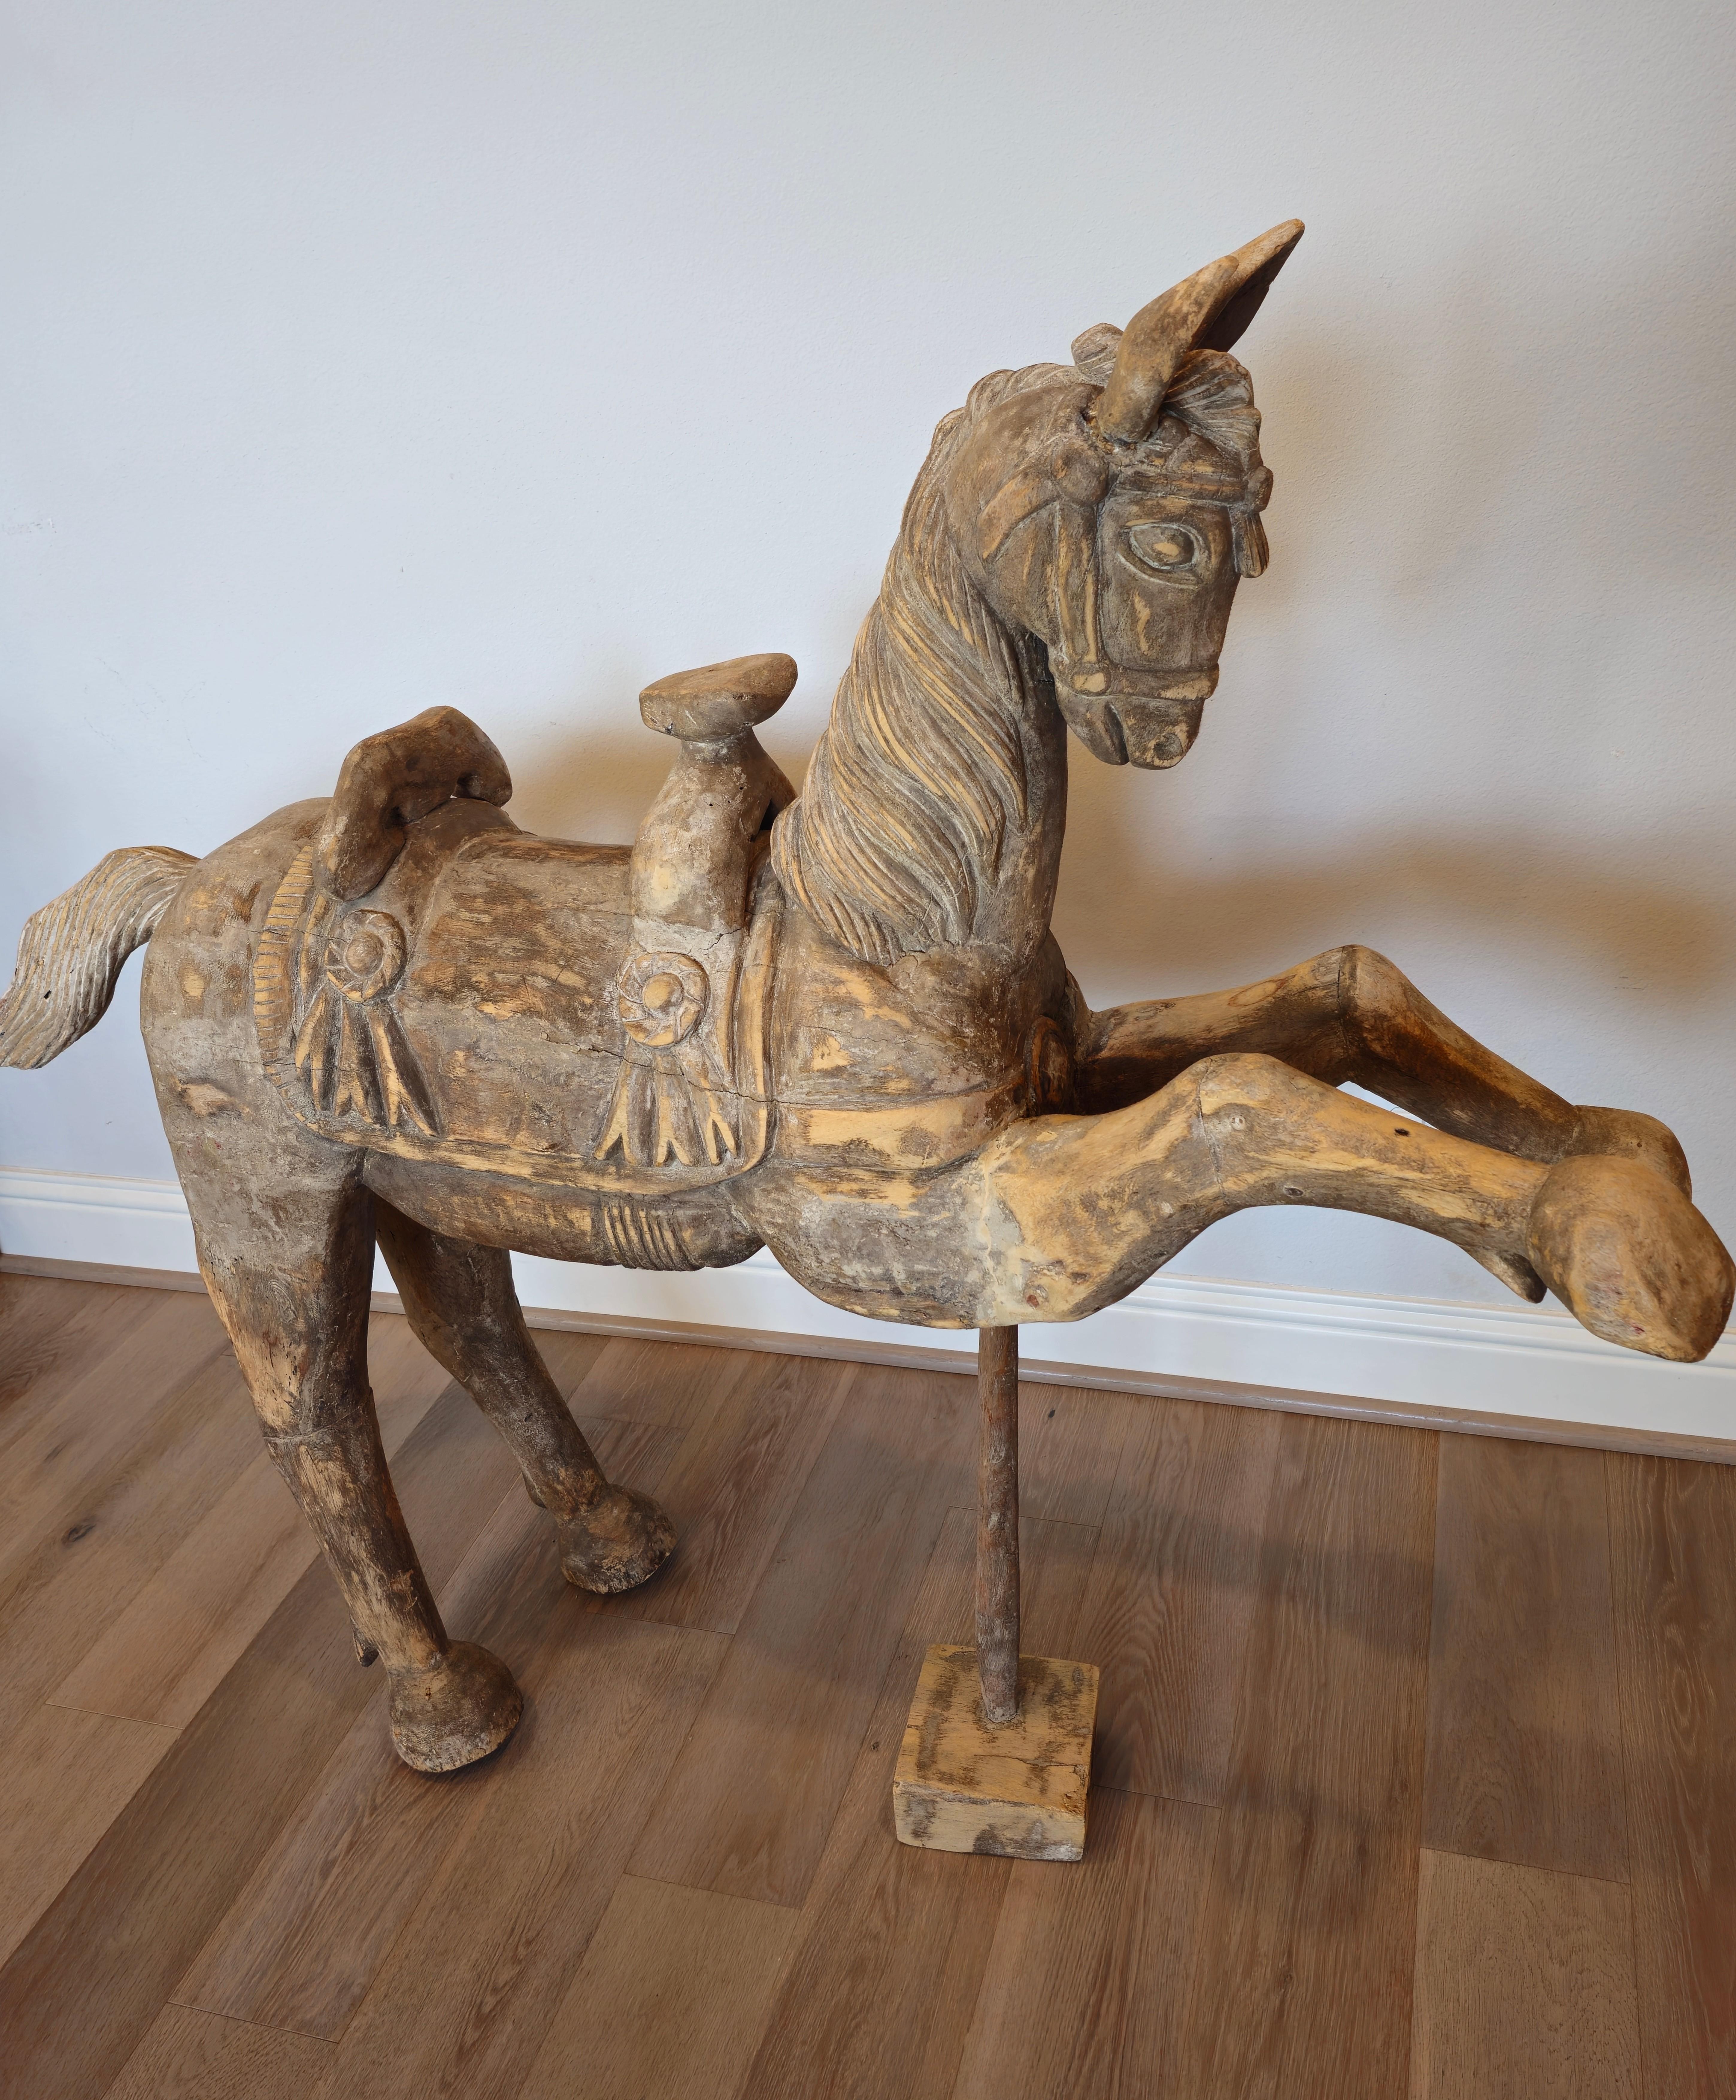 A large antique hand carved wooden horse sculpture on stand. Most likely from Southeast Asia, (Indonesian, Burmese, Thai) early 20th century, the lightweight softwood primitive carving is exceptionally executed, intricately detailed throughout,